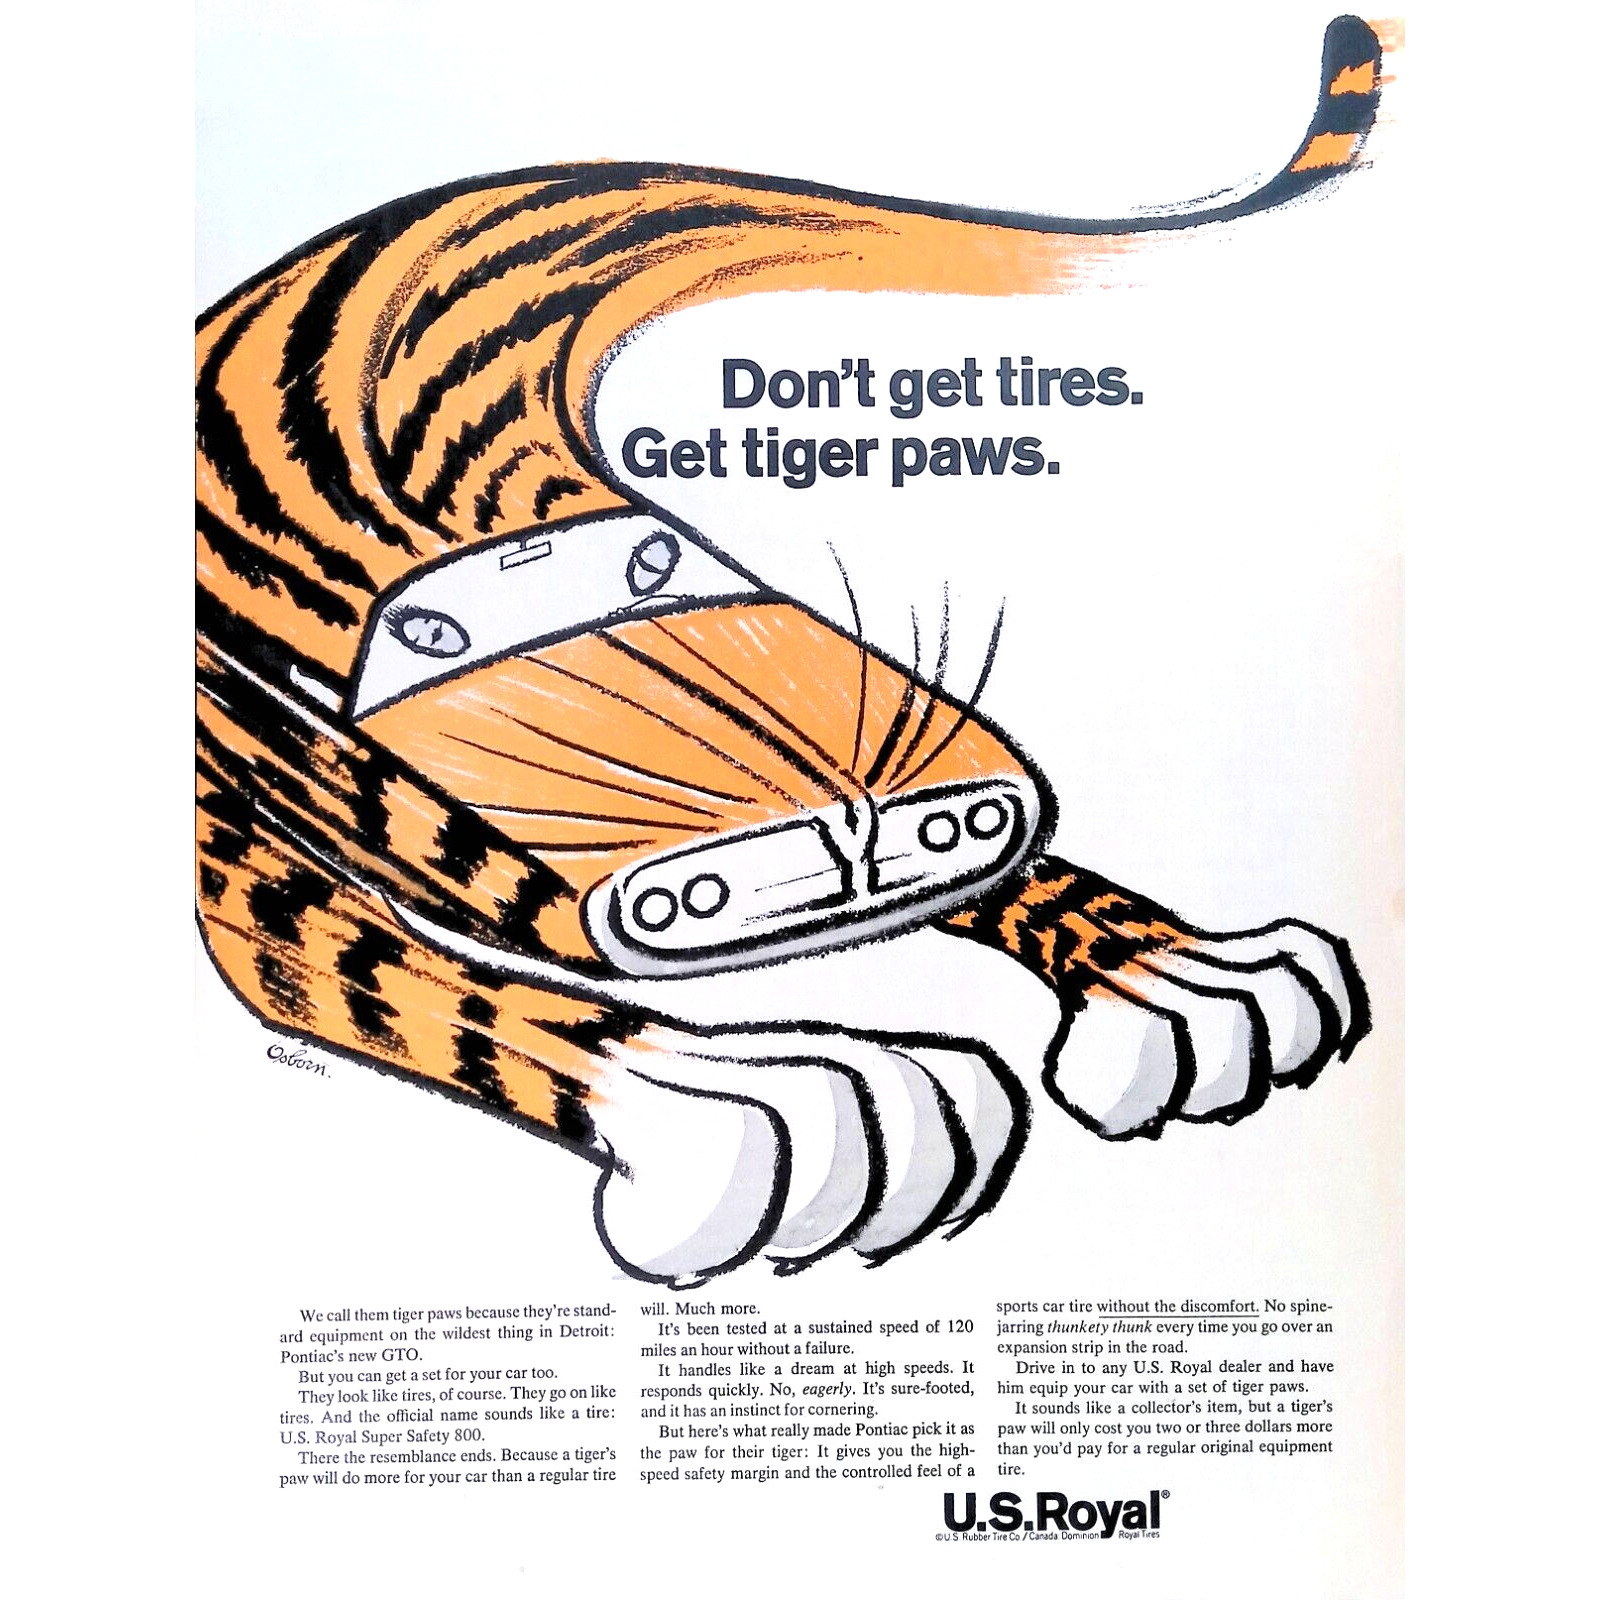 Tires 1961 Print Ad U.S. Royal Tire Don\'t Get Tires, Get Tiger Paws 11x14